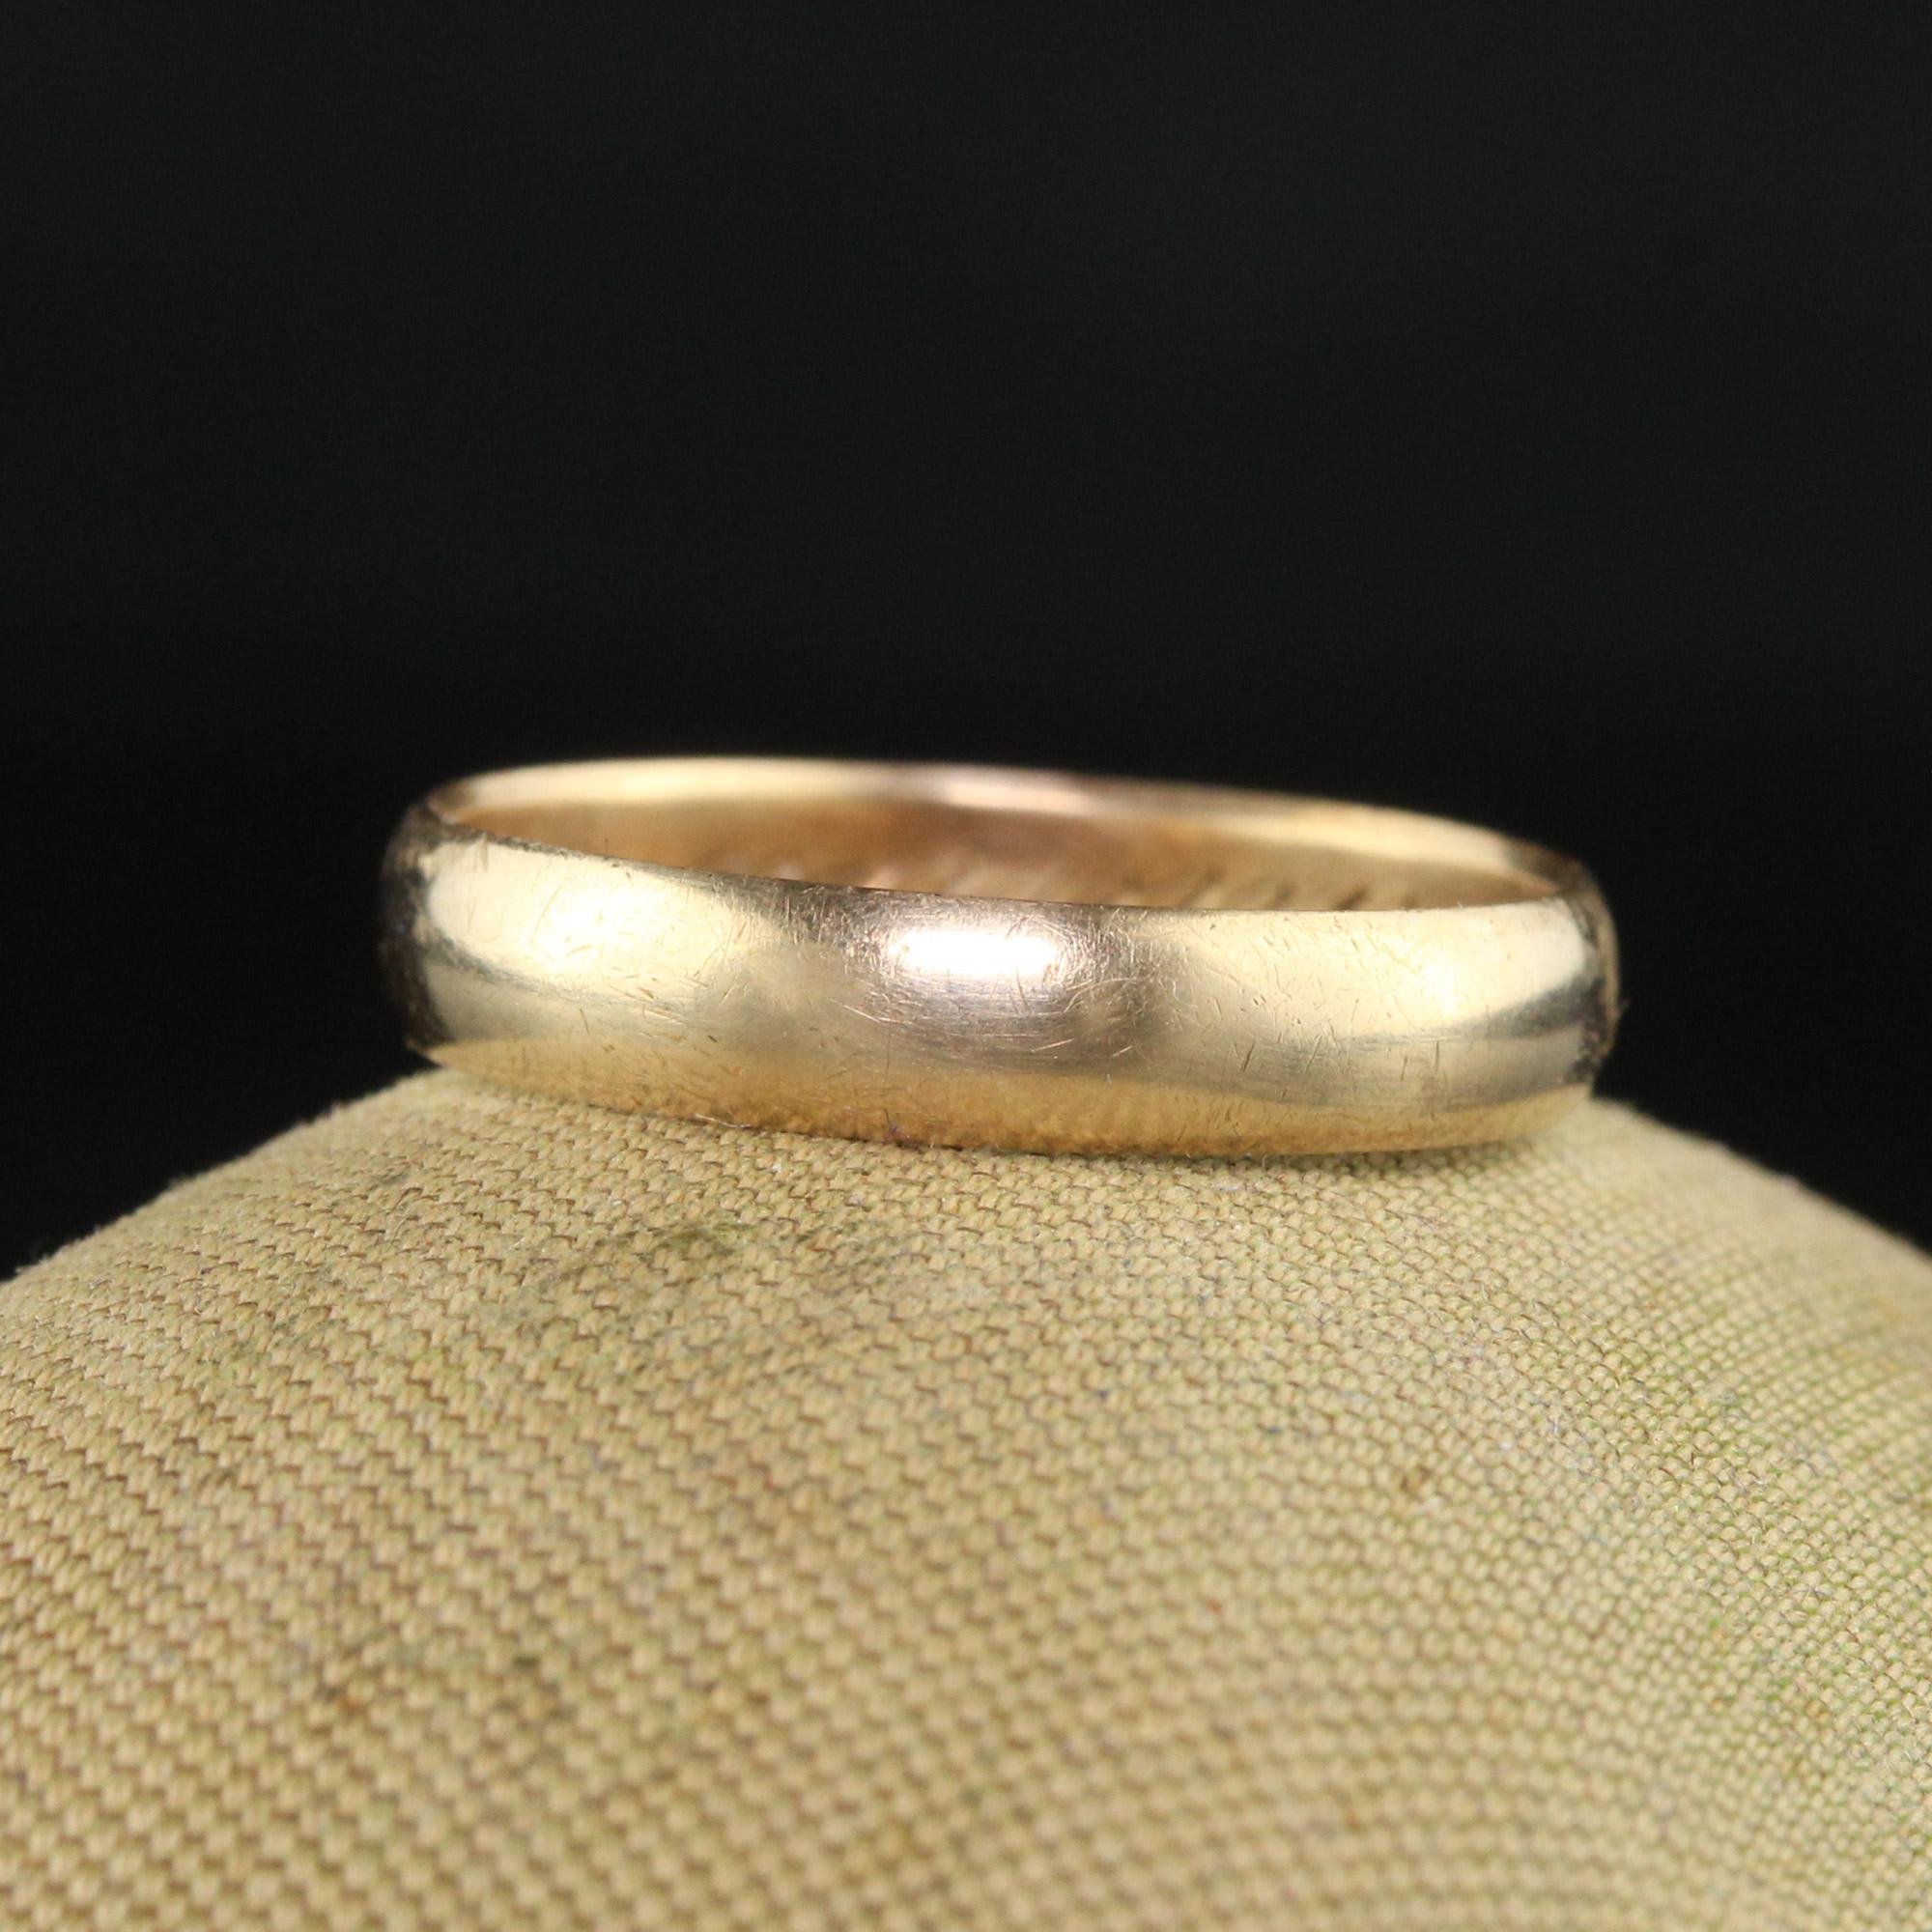 Beautiful Antique Art Deco 14K Yellow Gold Classic Plain Wedding Band - Size 4 1/4. This classic wedding band is crafted in 14k yellow gold. The ring has a nice patina on it and is engraved 